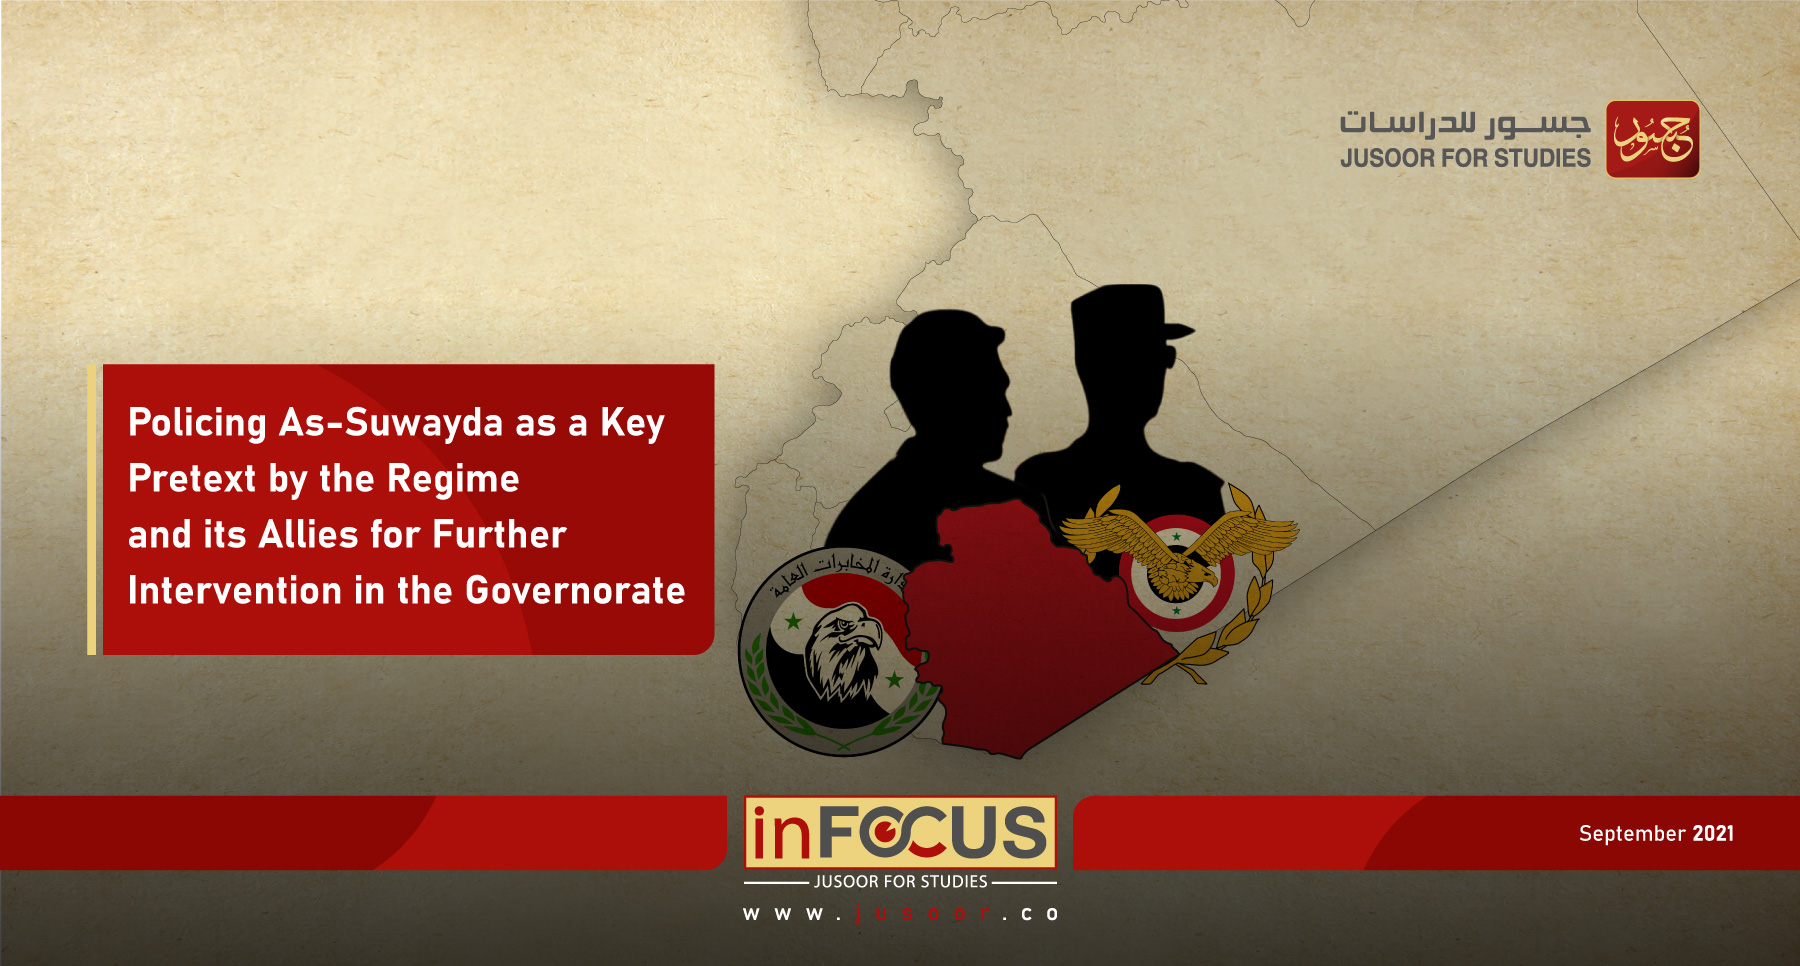 Policing As-Suwayda as a Key Pretext by the Regime and its Allies for Further Intervention in the Governorate